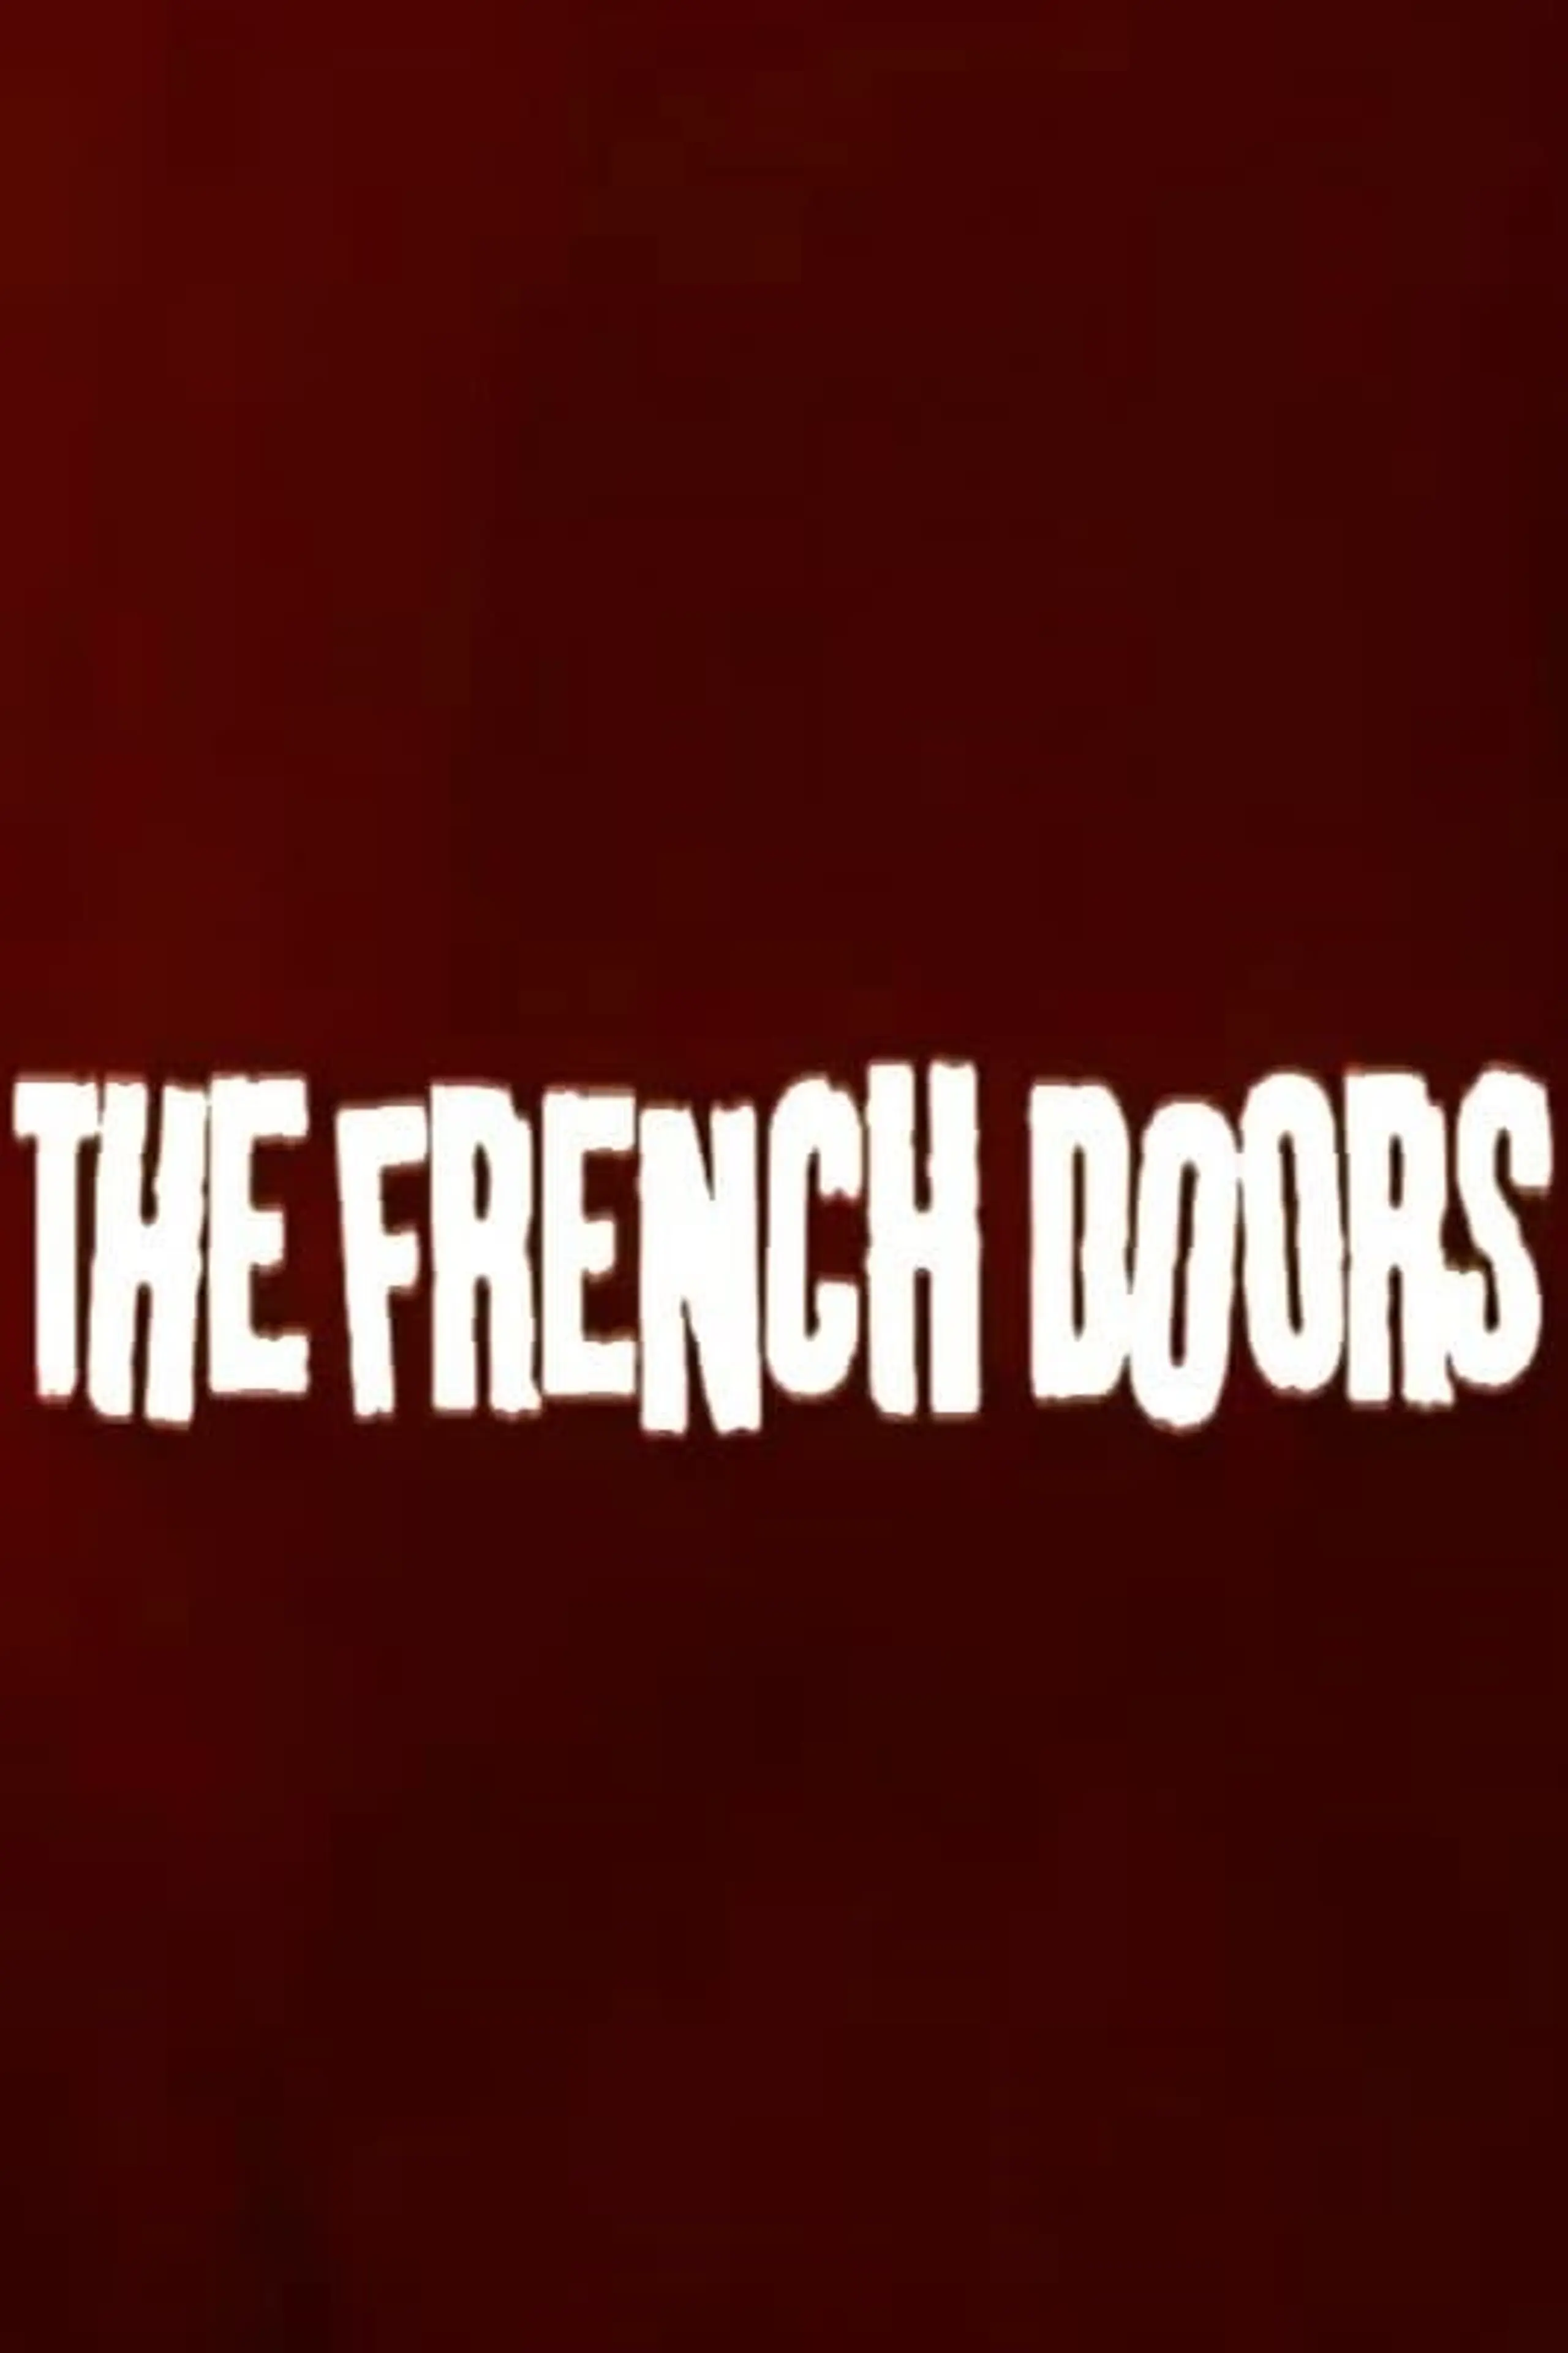 The French Doors